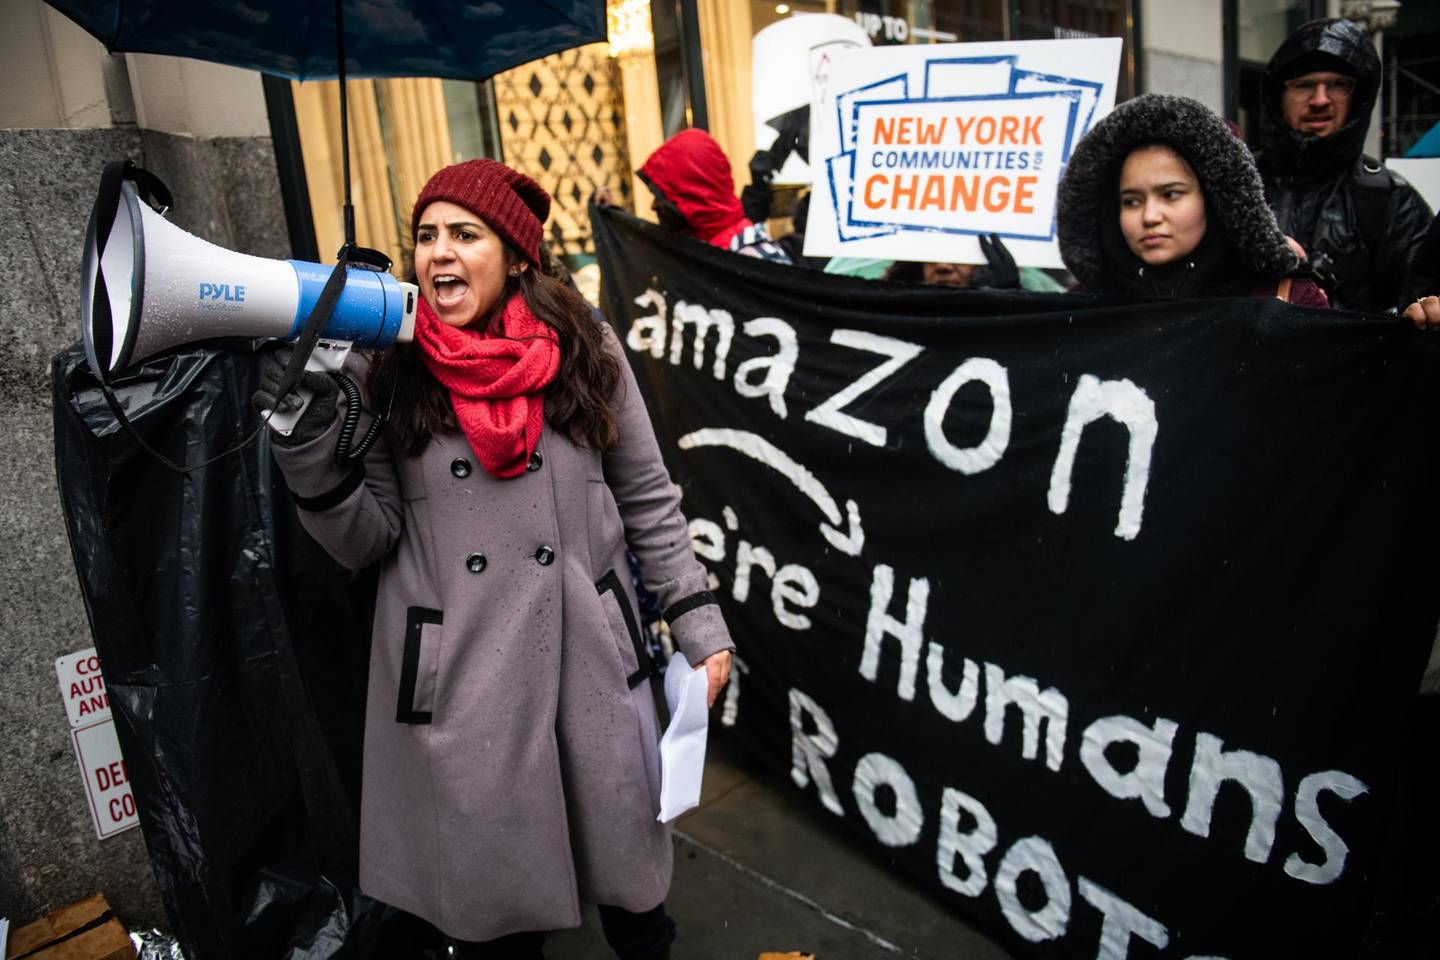 A demonstrator shouts slogans into a megaphone outside the penthouse of Jeff Bezos, founder and chief executive officer of Amazon.Com Inc., during a protest against Amazon in New York, U.S., on Monday, Dec. 2, 2019. The optics war between Amazon.com Inc. and its critics is intensifying on Cyber Monday with labor, environmental and digital privacy groups staging events around the globe to amplify their concerns about the world's biggest online retailer. Photographer: Mark Kauzlarich/Bloomberg